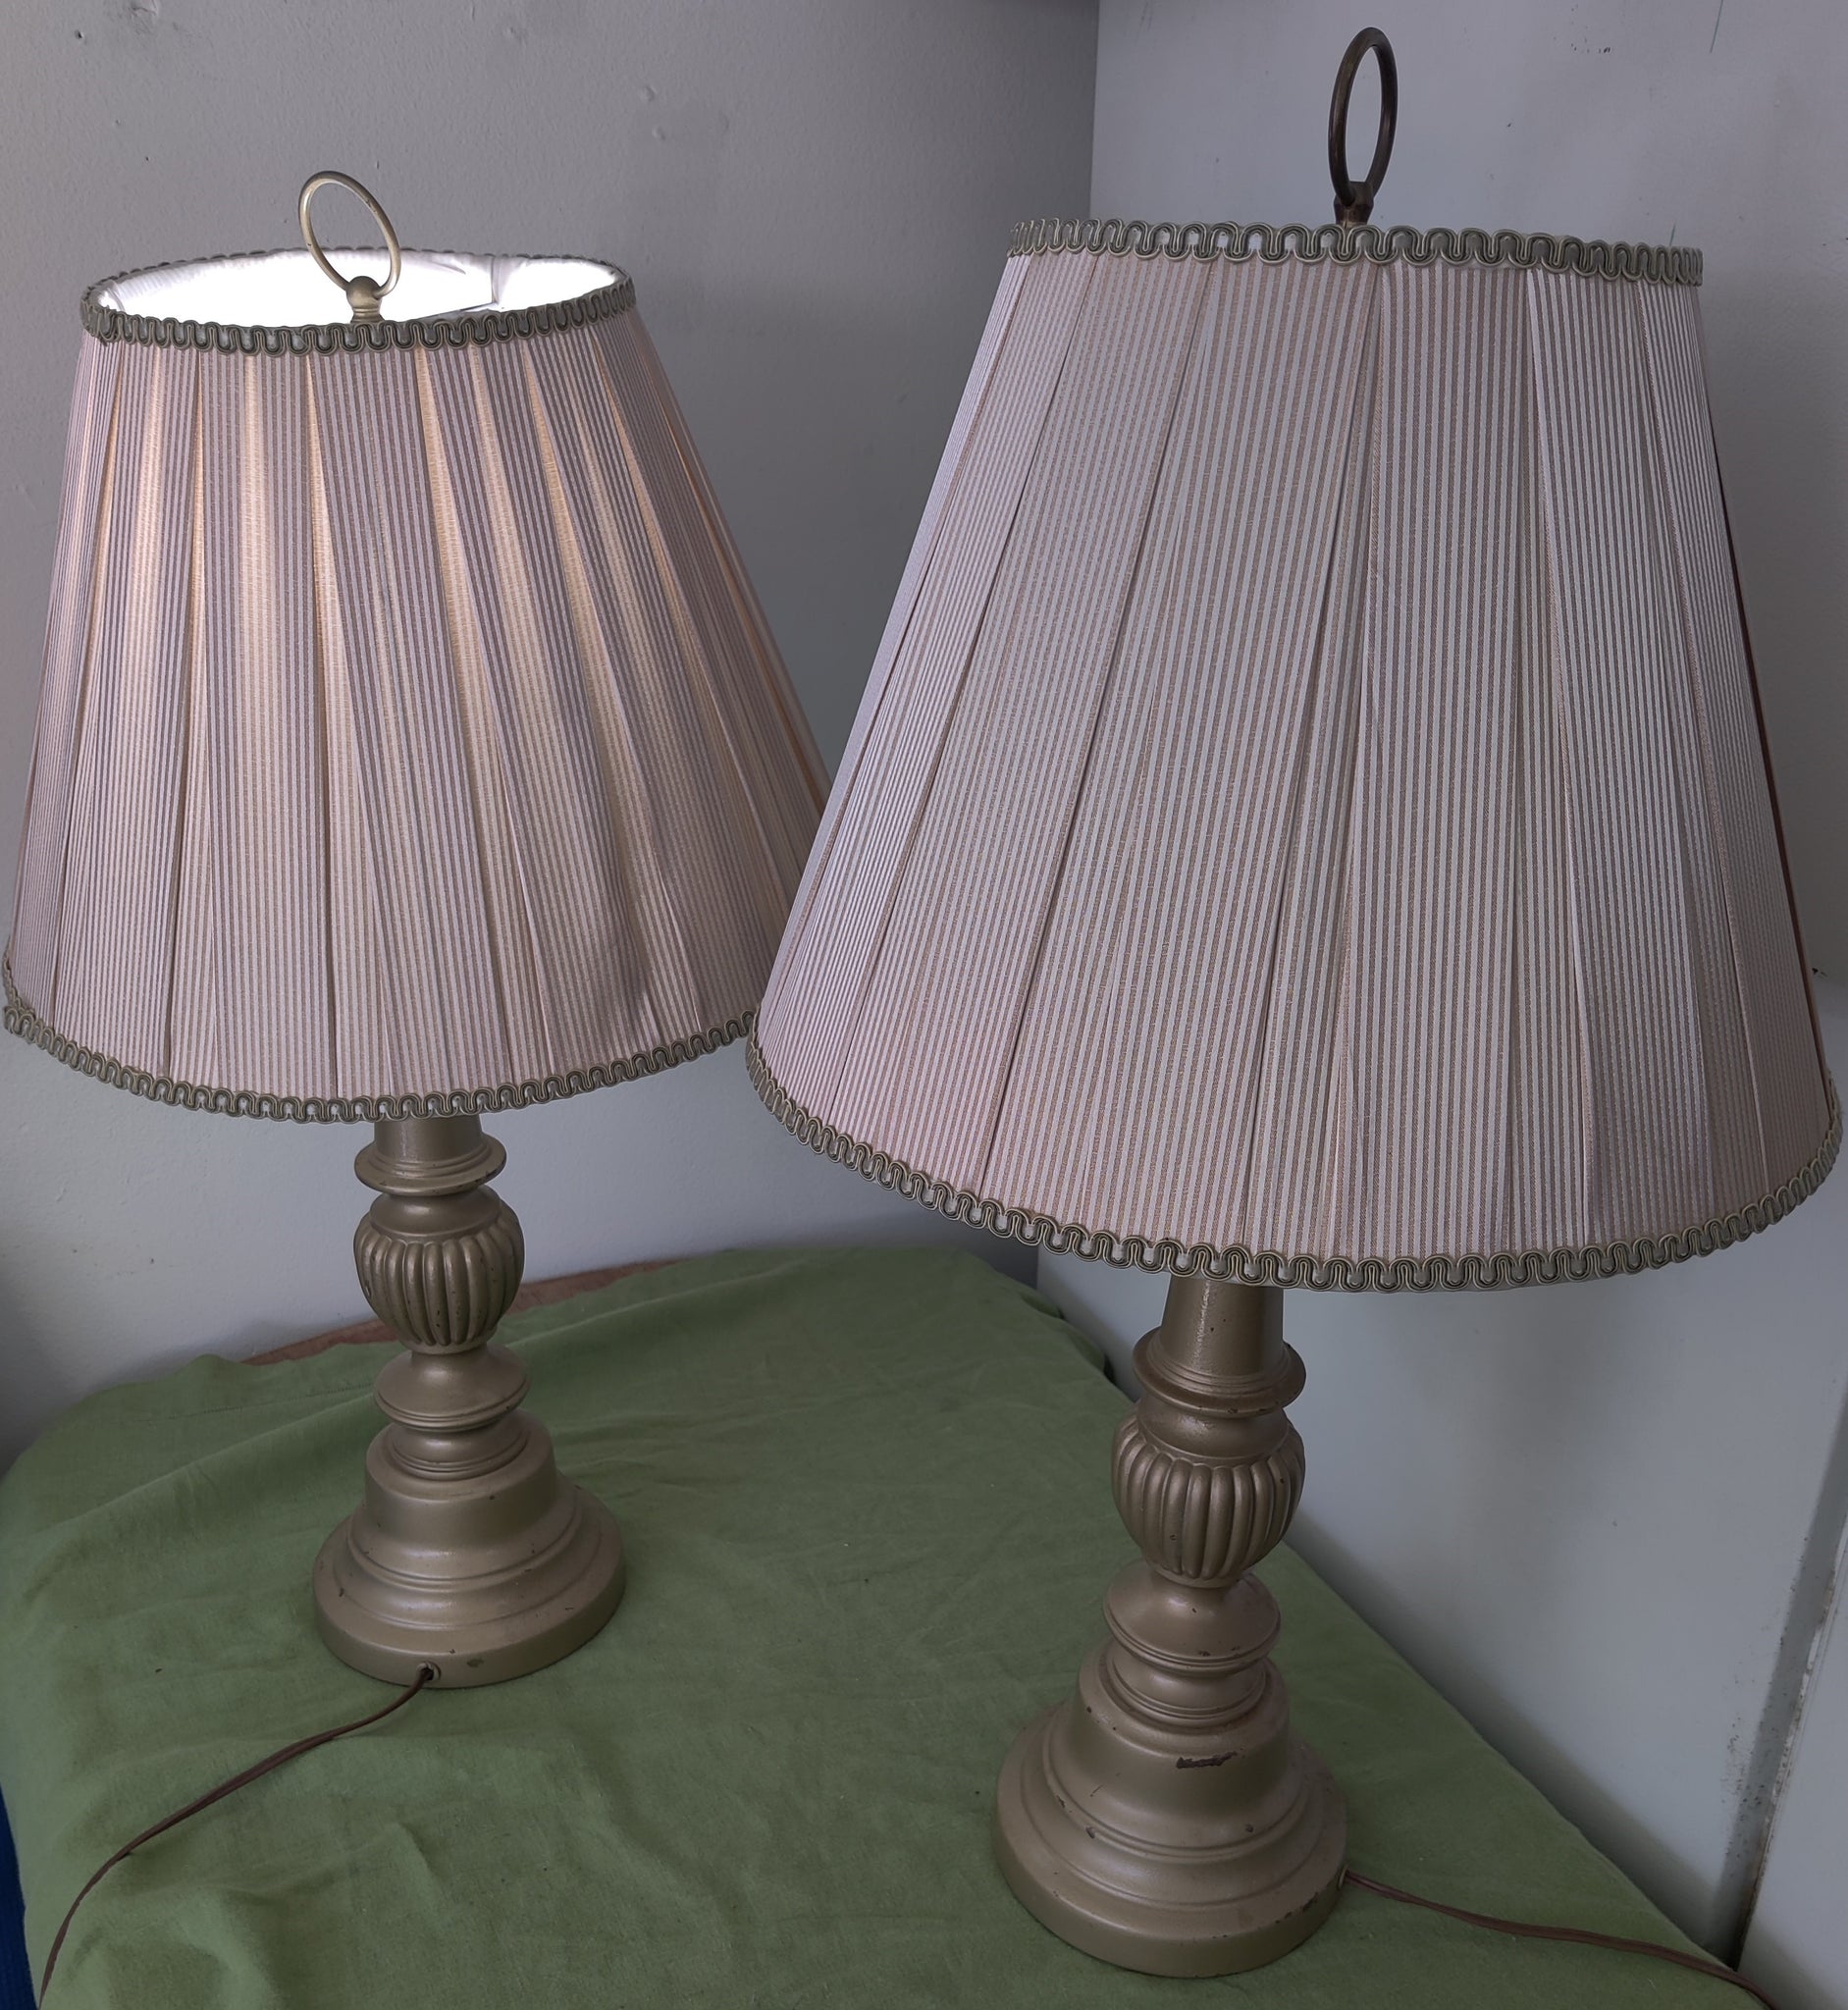 Set of 2 Matching Lamps w/ Lamp Shades (READ DETAILS)